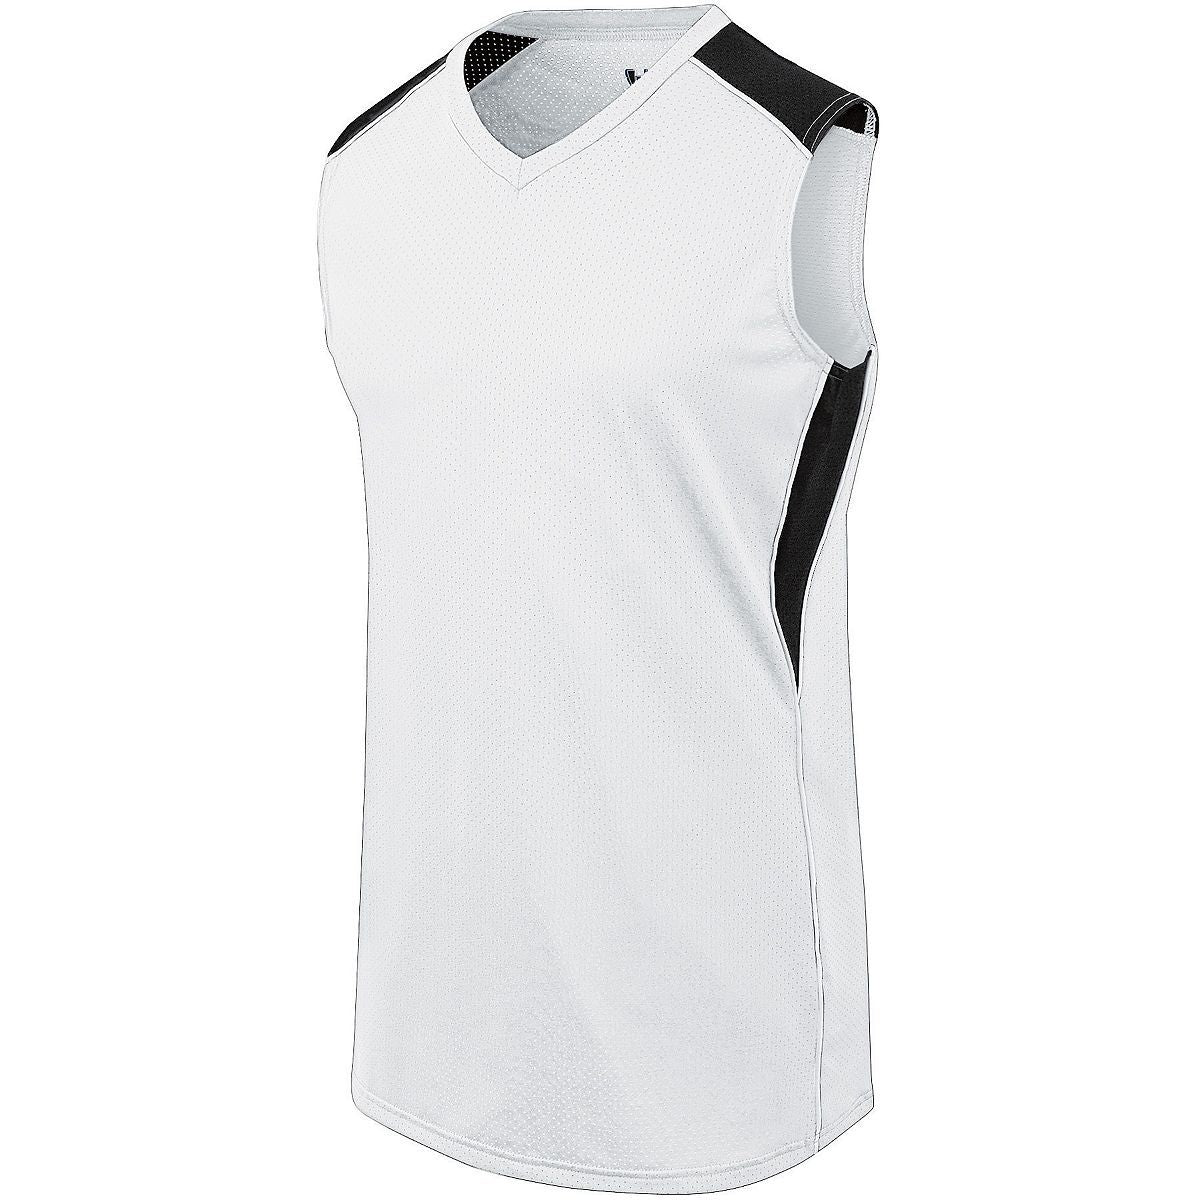 Augusta Sportswear Ladies Dynamite Jersey in White/Black/White  -Part of the Ladies, Ladies-Jersey, Augusta-Products, Softball, Shirts product lines at KanaleyCreations.com